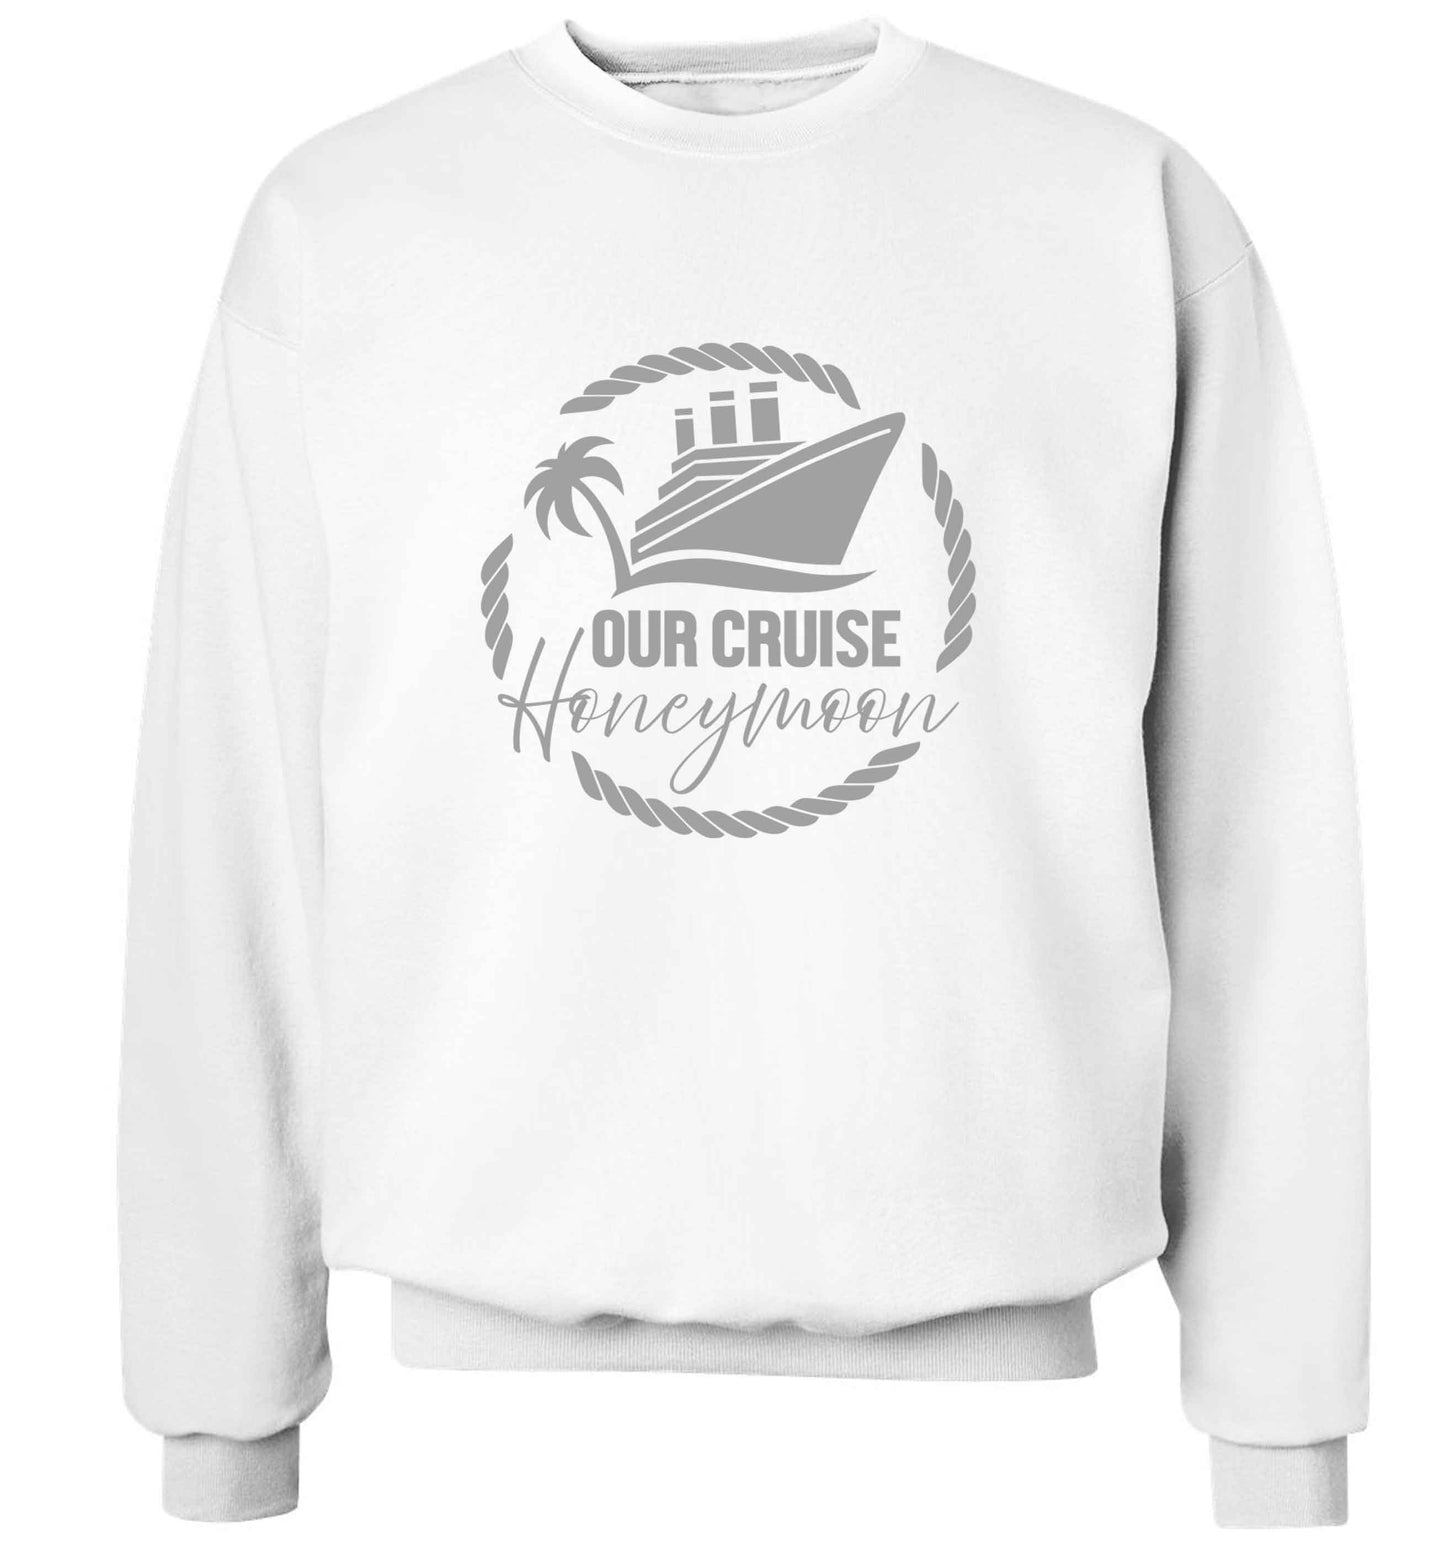 Our cruise honeymoon adult's unisex white sweater 2XL